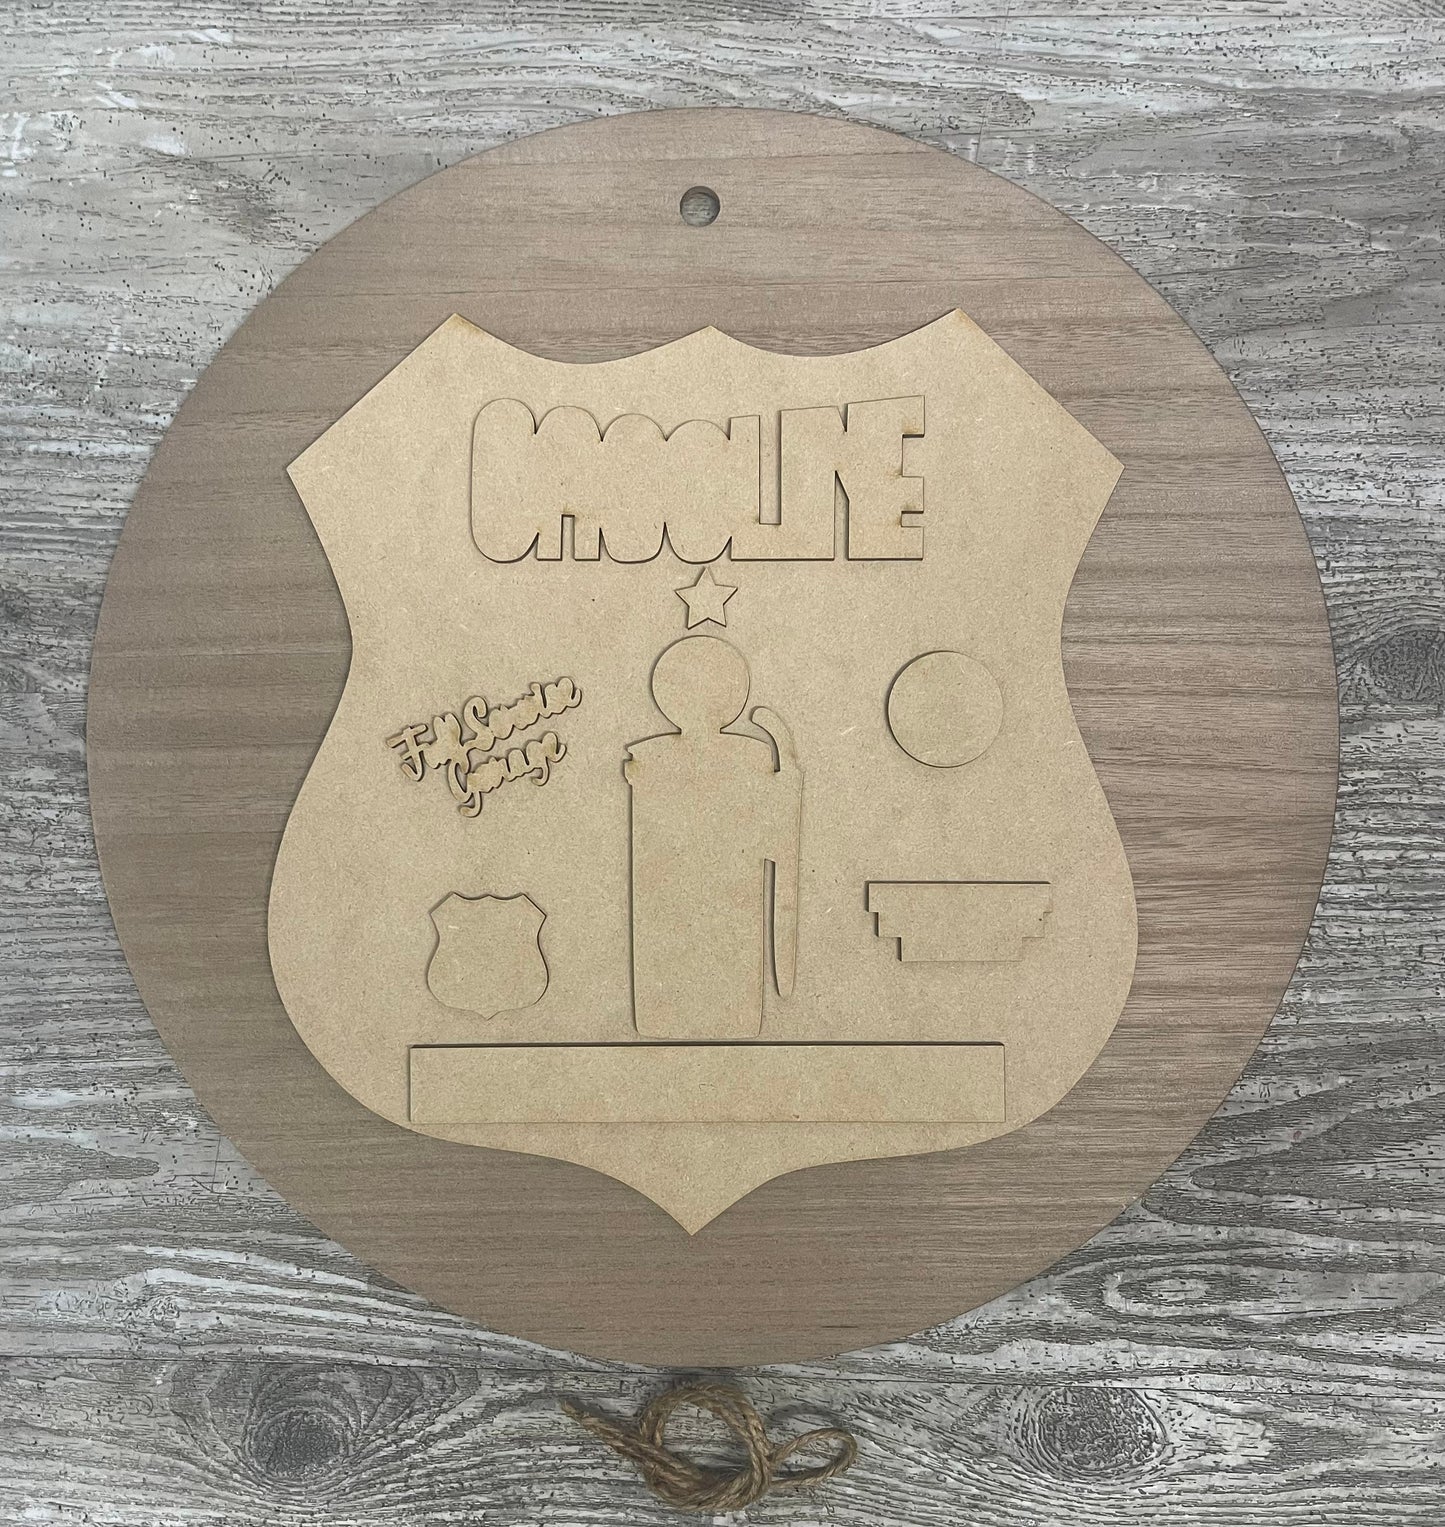 Sign 16” round with Premium Gasoline cutouts - unpainted wooden cutouts, ready for you to paint